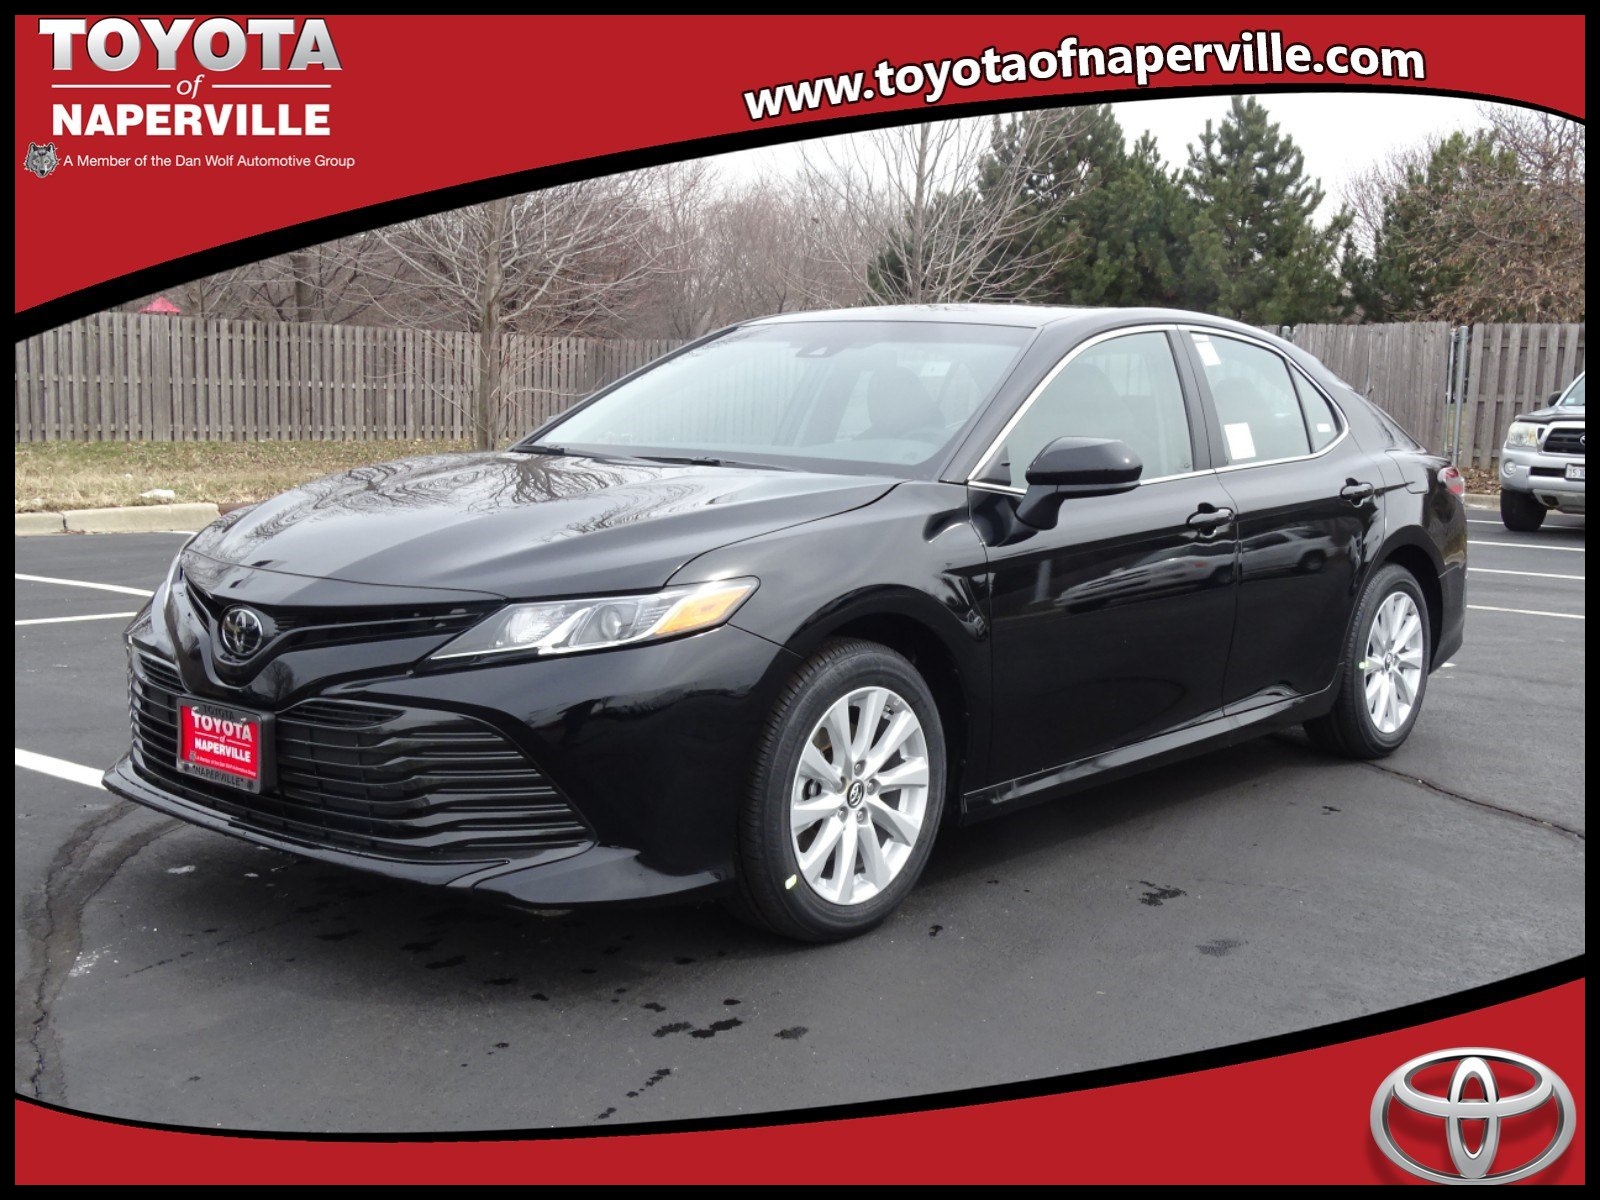 2018 toyota Camry Se Lease Specials Beautiful Awesome 2018 toyota Camry Se Lease Specials